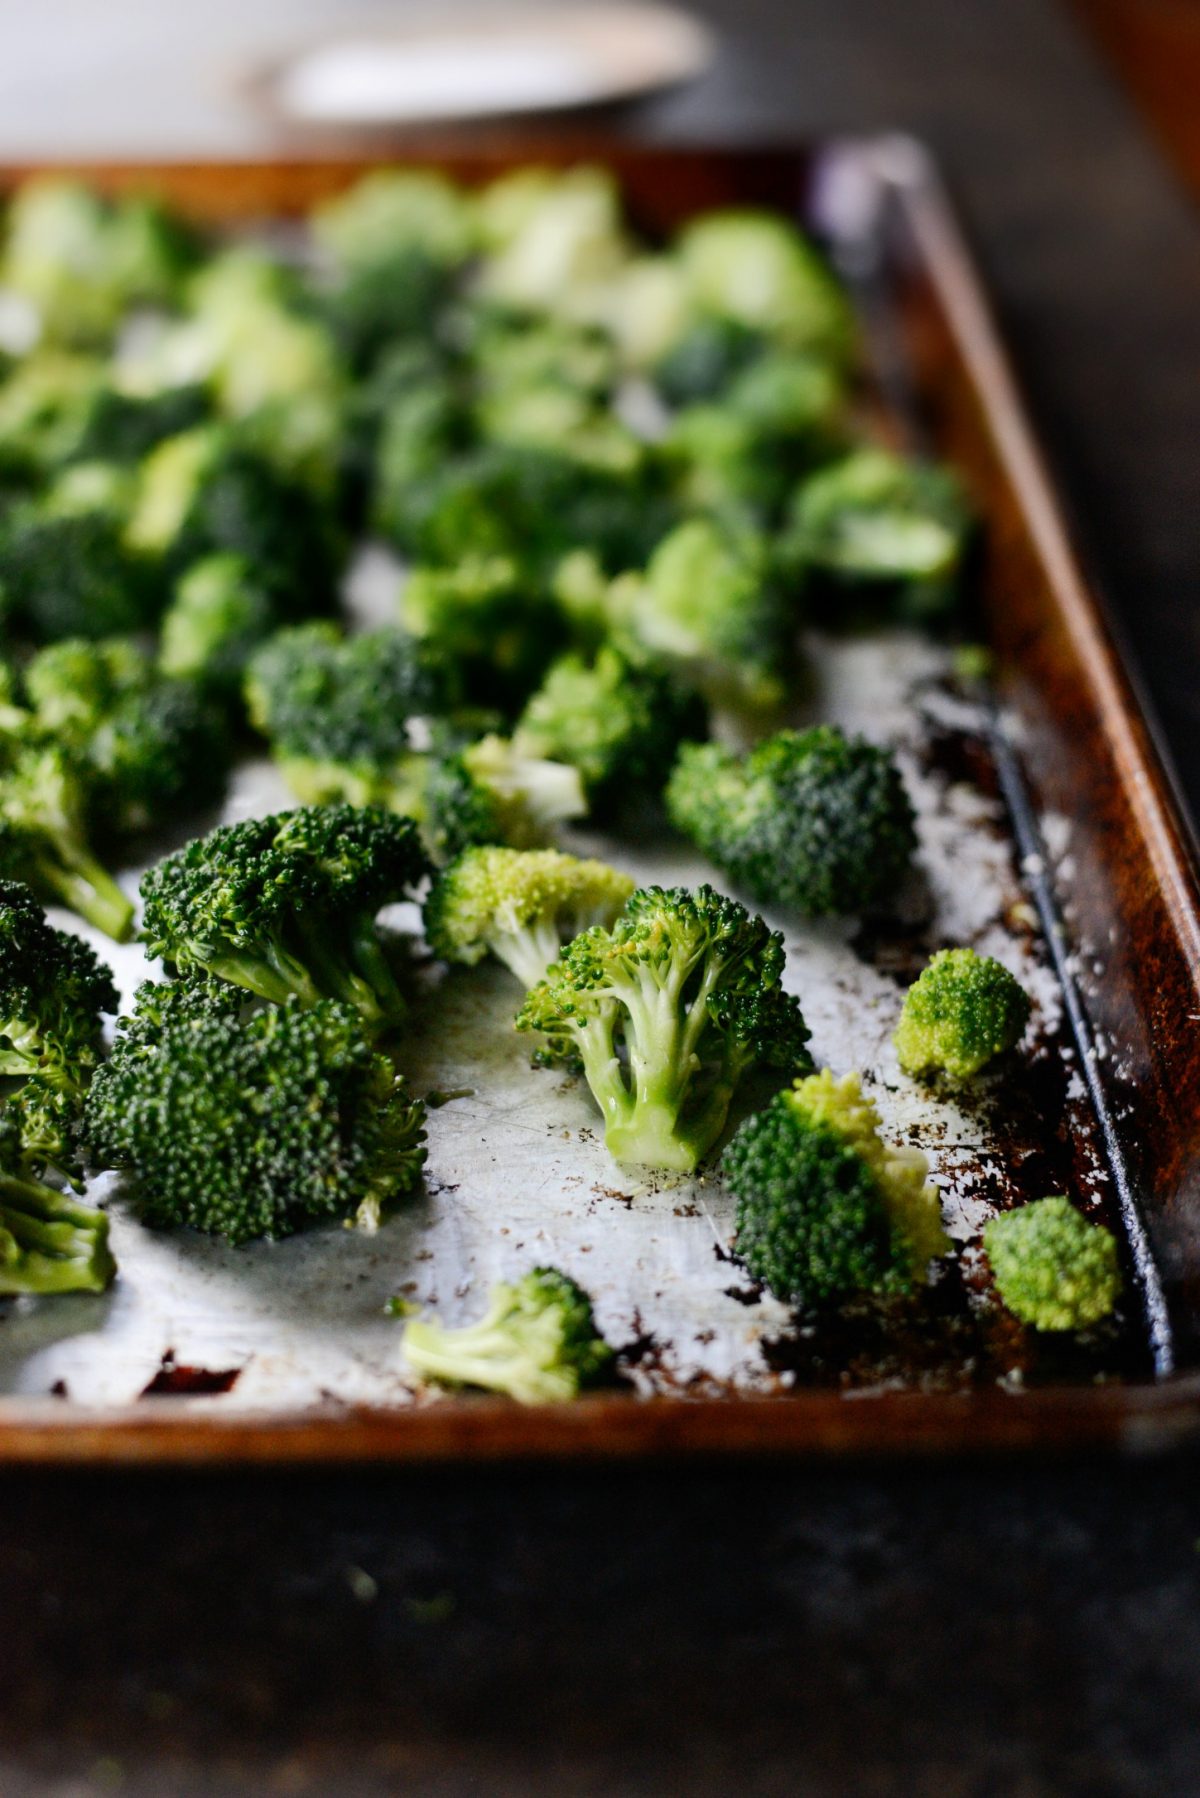 spread the broccoli in an even layer on baking sheet.